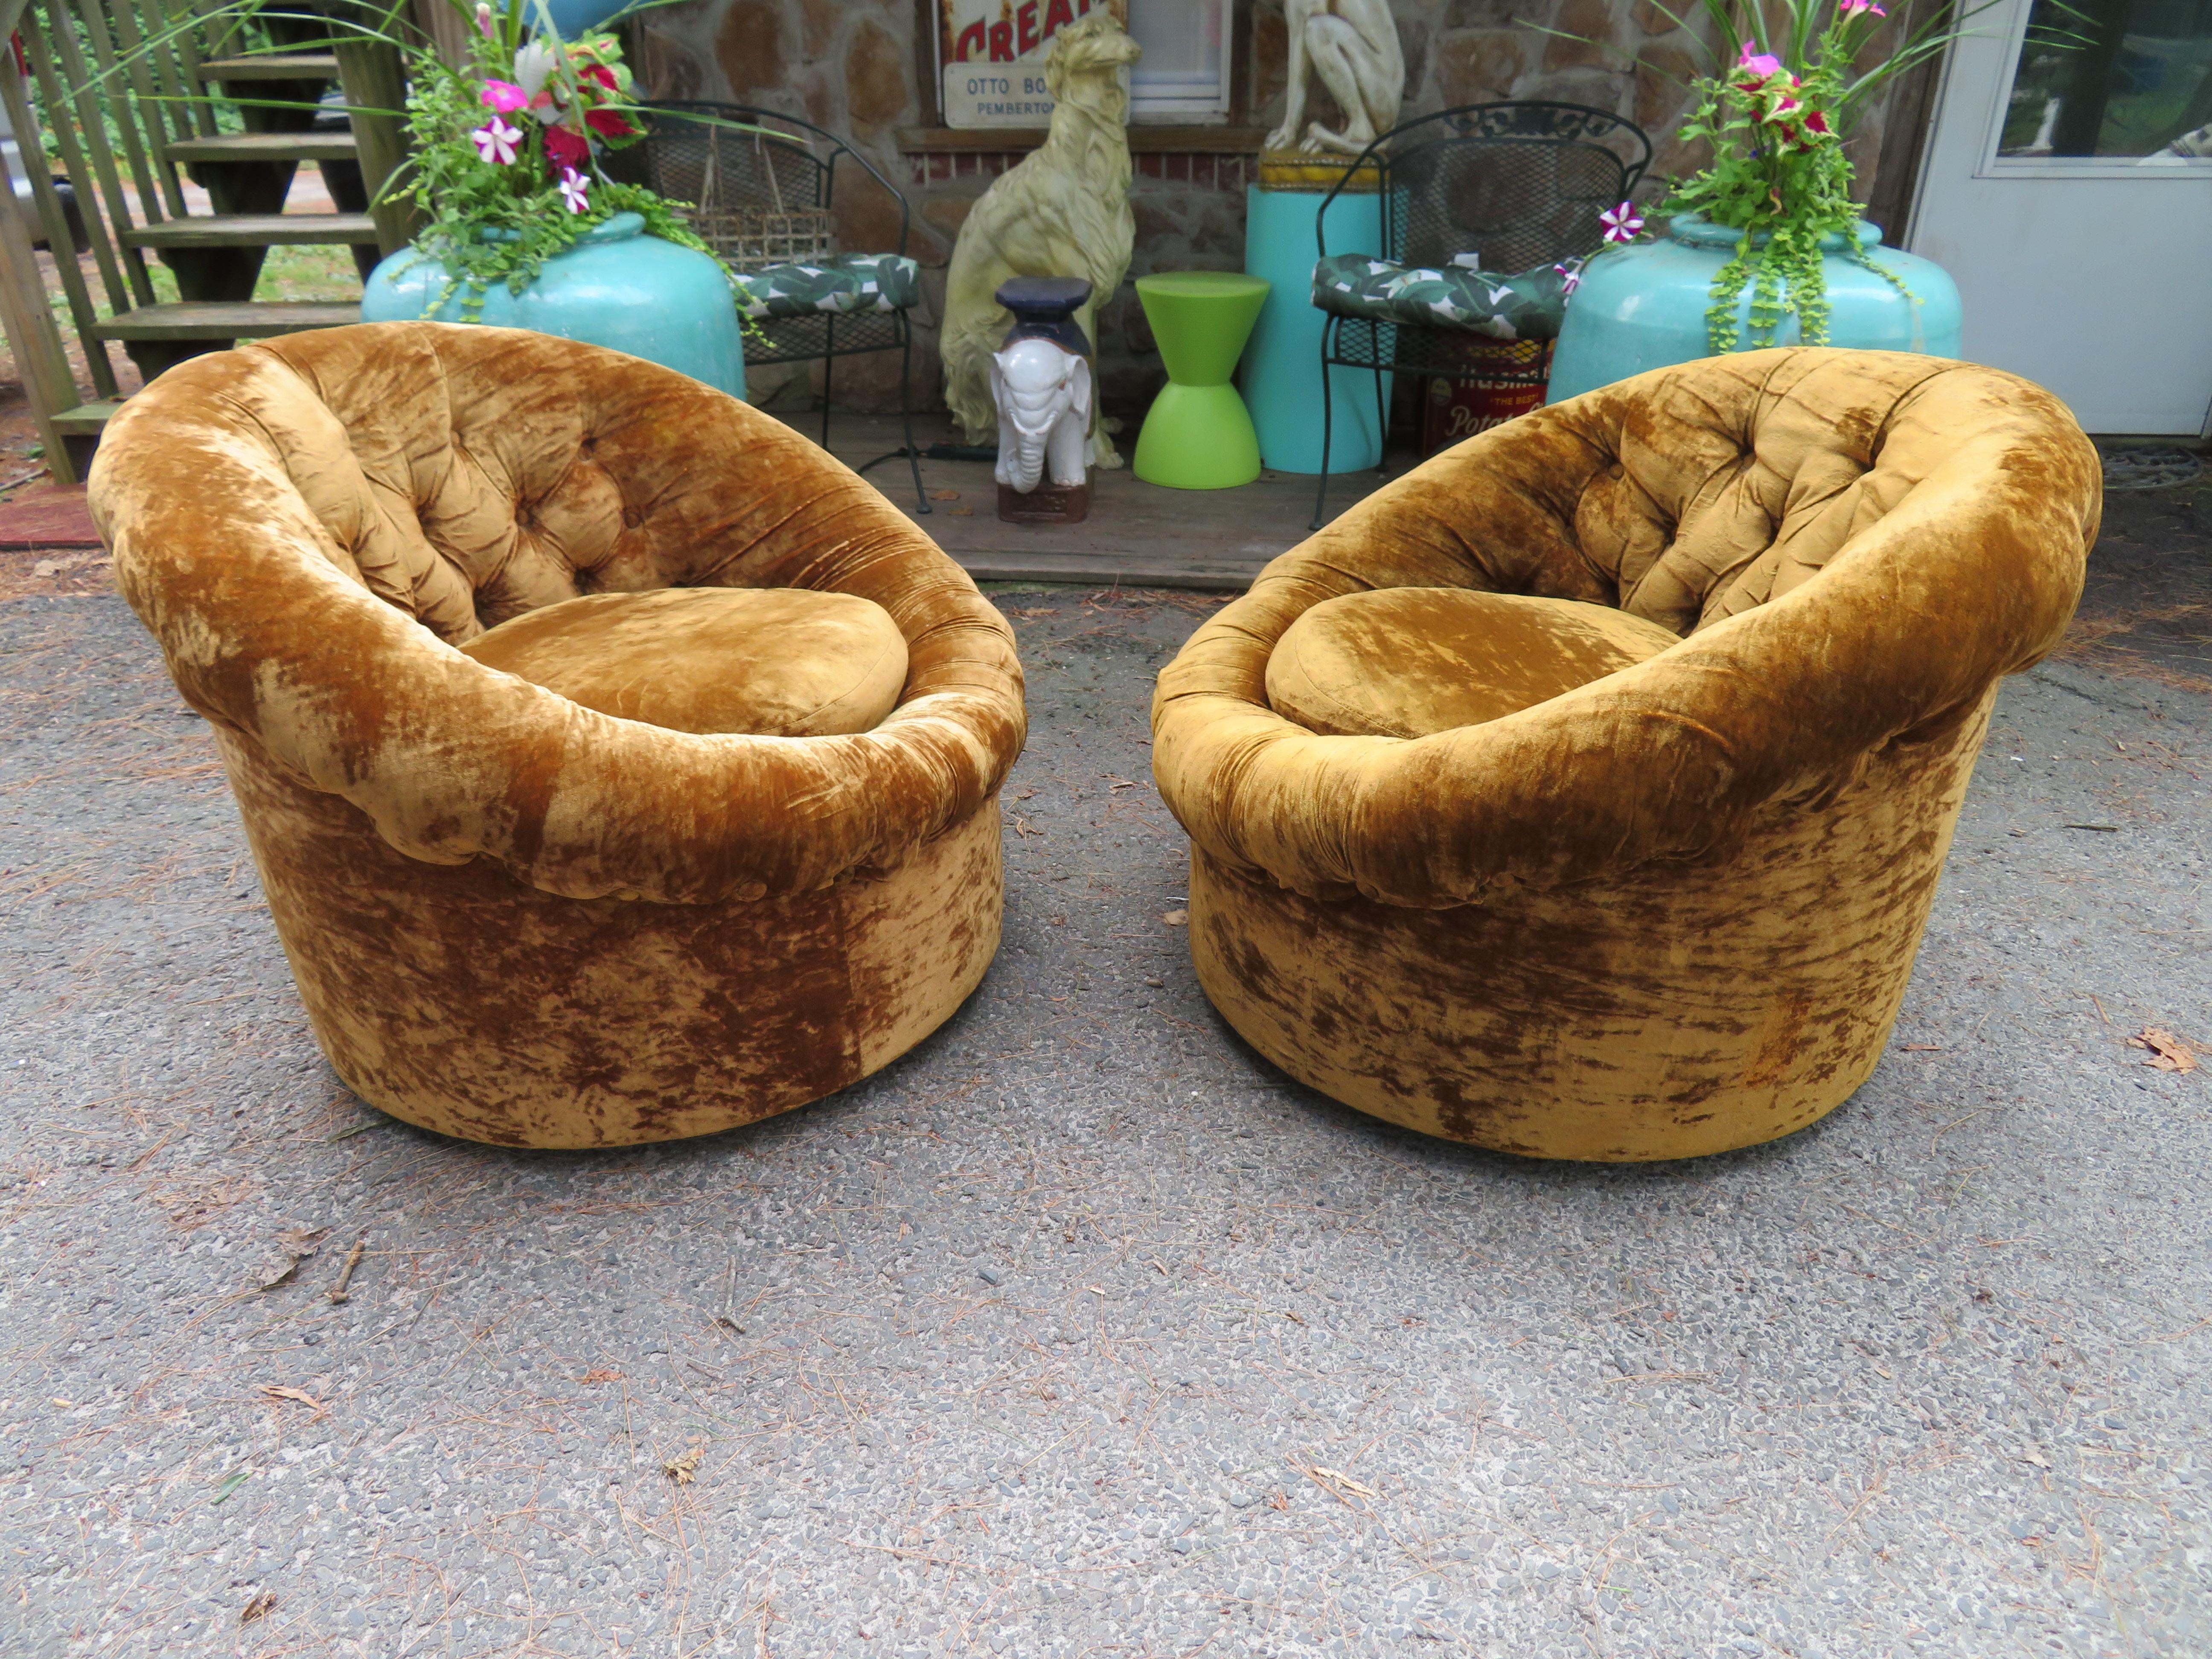 Fantastic pair of Pierre Paulin style tufted swivel pod chairs. This pair retains their original orange crushed velvet which is still presentable. We actually love the original fabric giving them authentic vintage appeal.